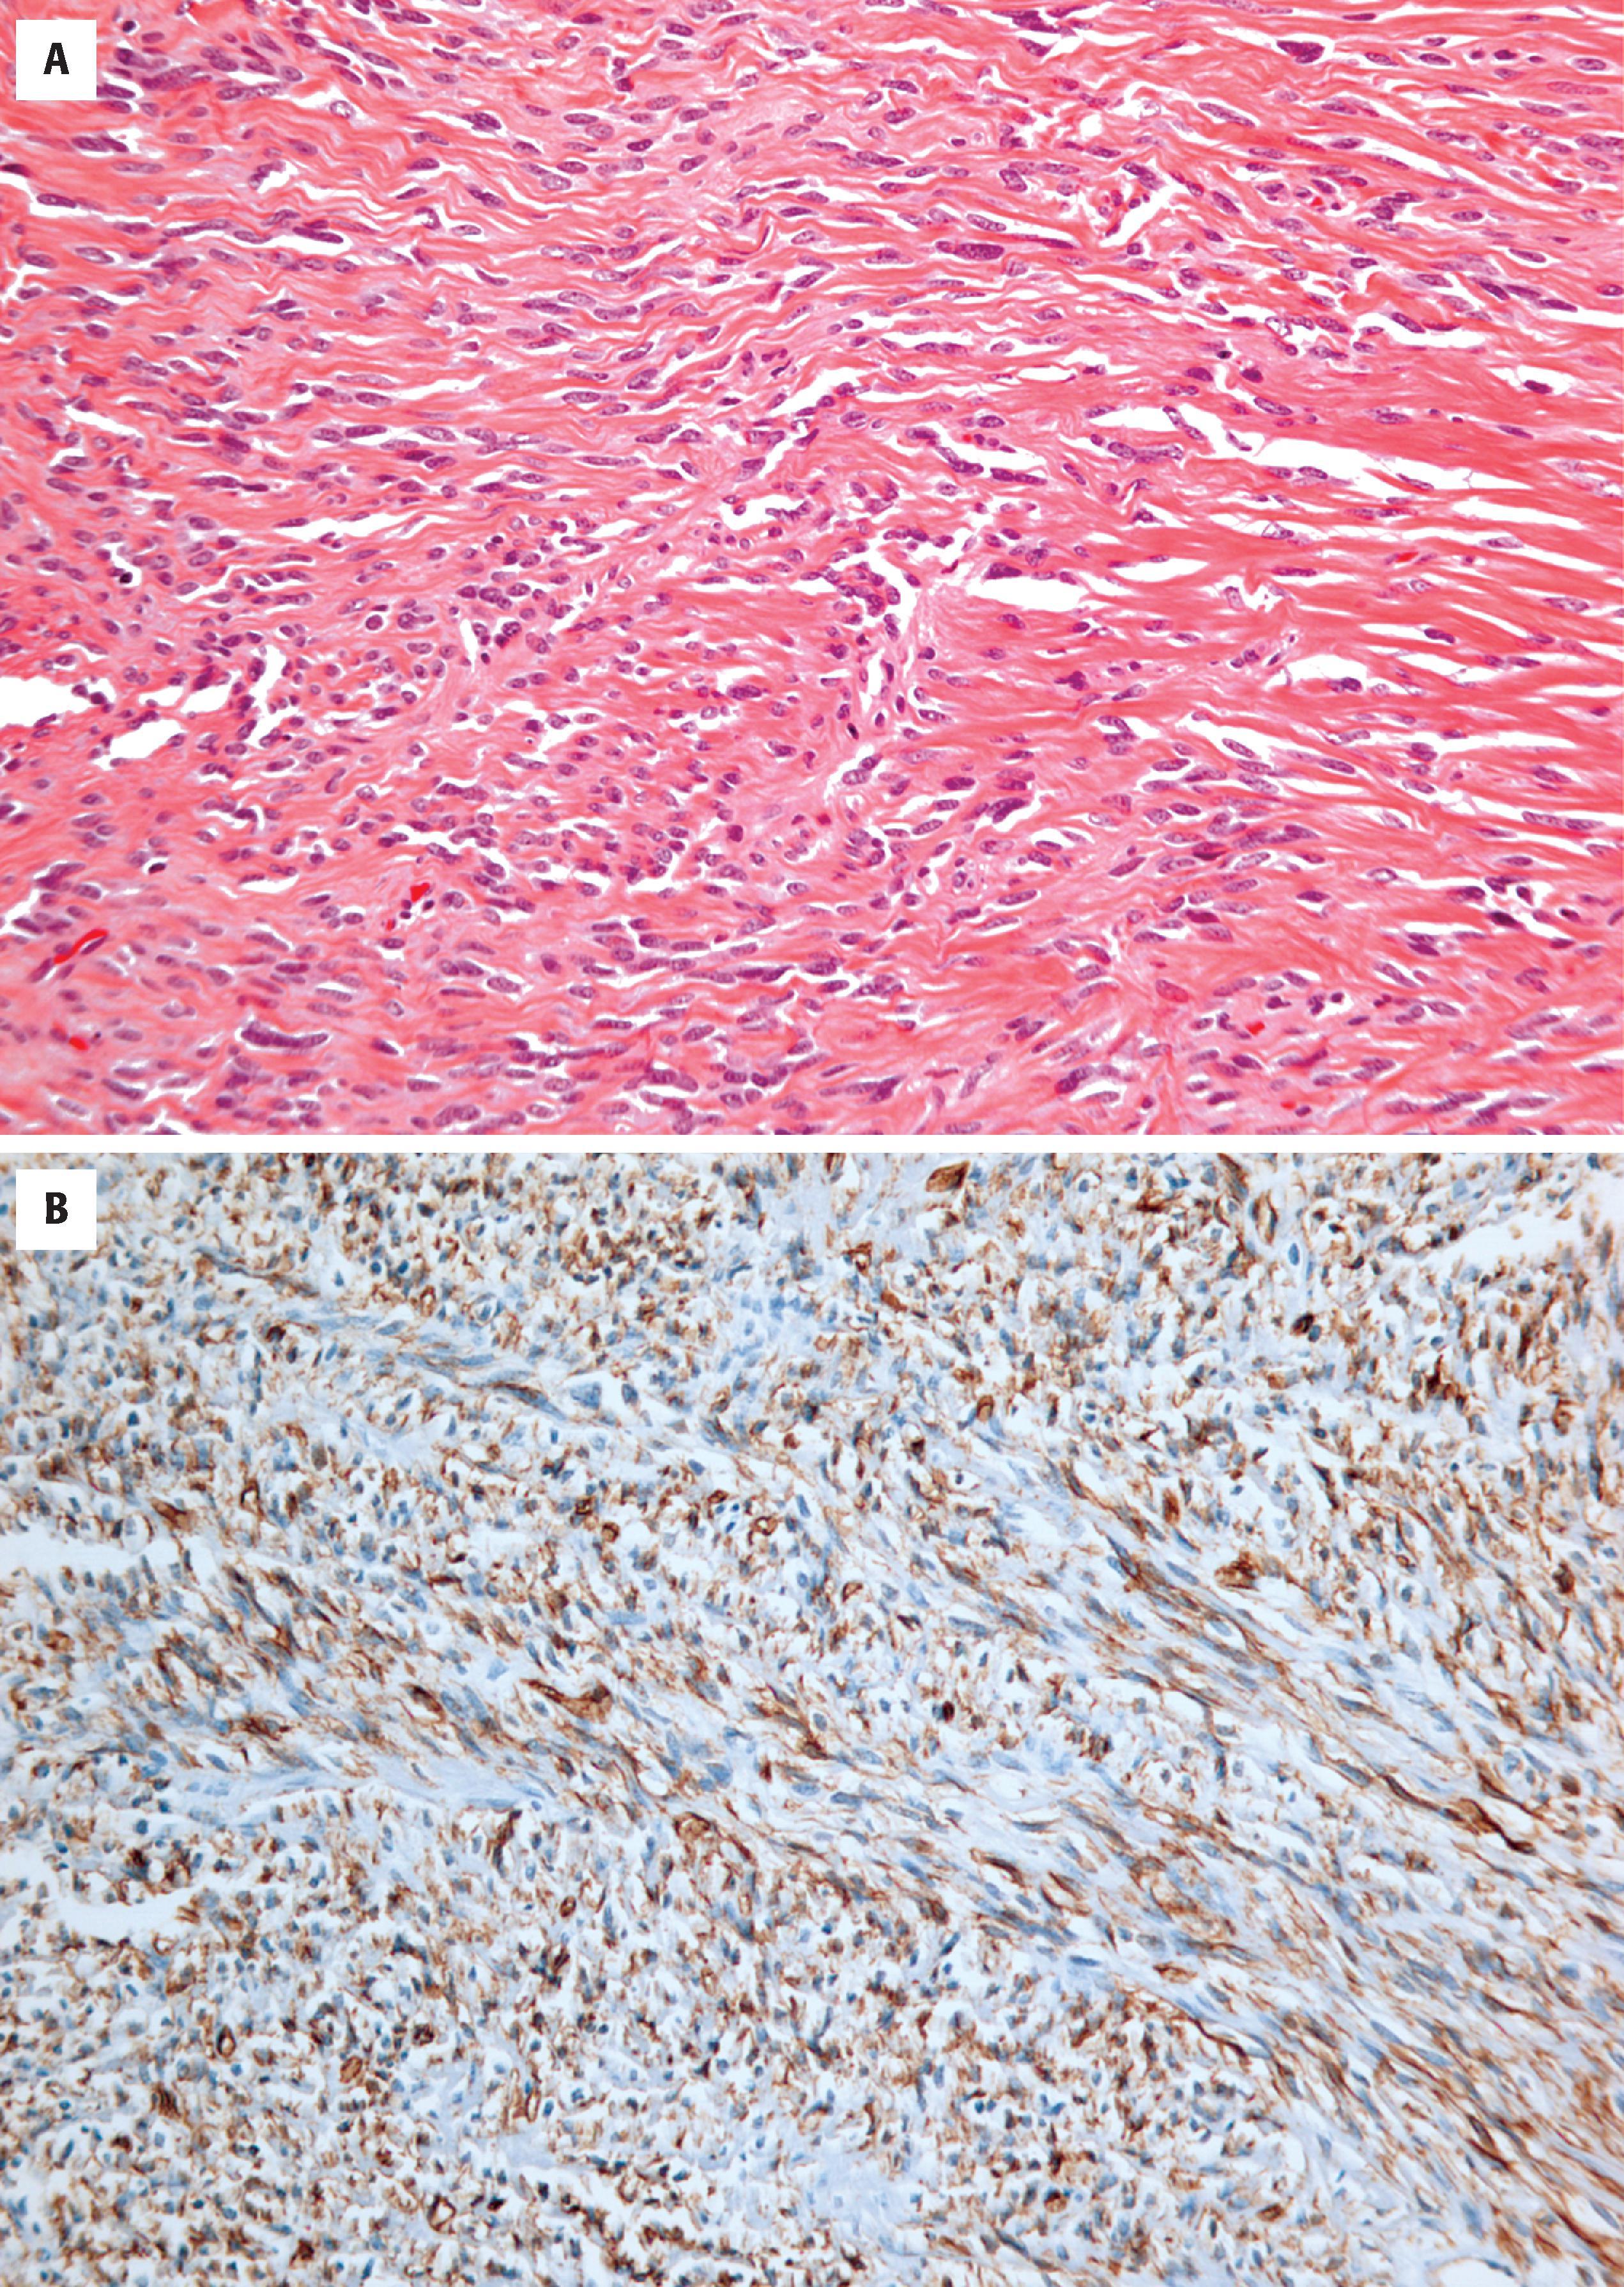 FIGURE 10.4, A, Low-grade solitary fibrous tumor (WHO grade 1) may resemble a fibrous meningioma. In contrast to fibrous meningioma, solitary fibrous tumors are marked by abundant collagen material deposited between individual cells. B, CD34 immunoreactivity in a low-grade solitary fibrous tumor.